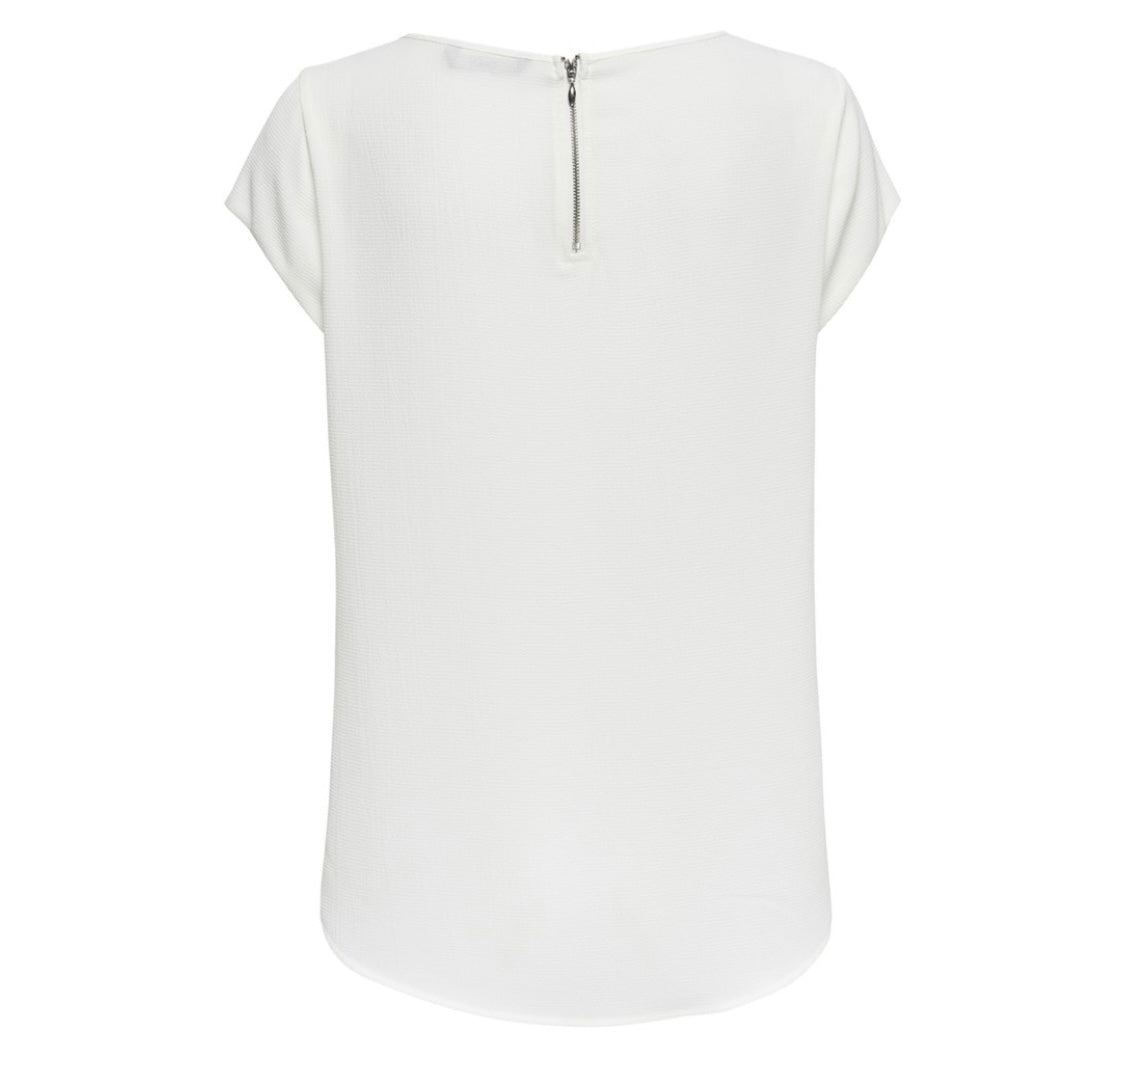 VIC TOP S/S WHITE